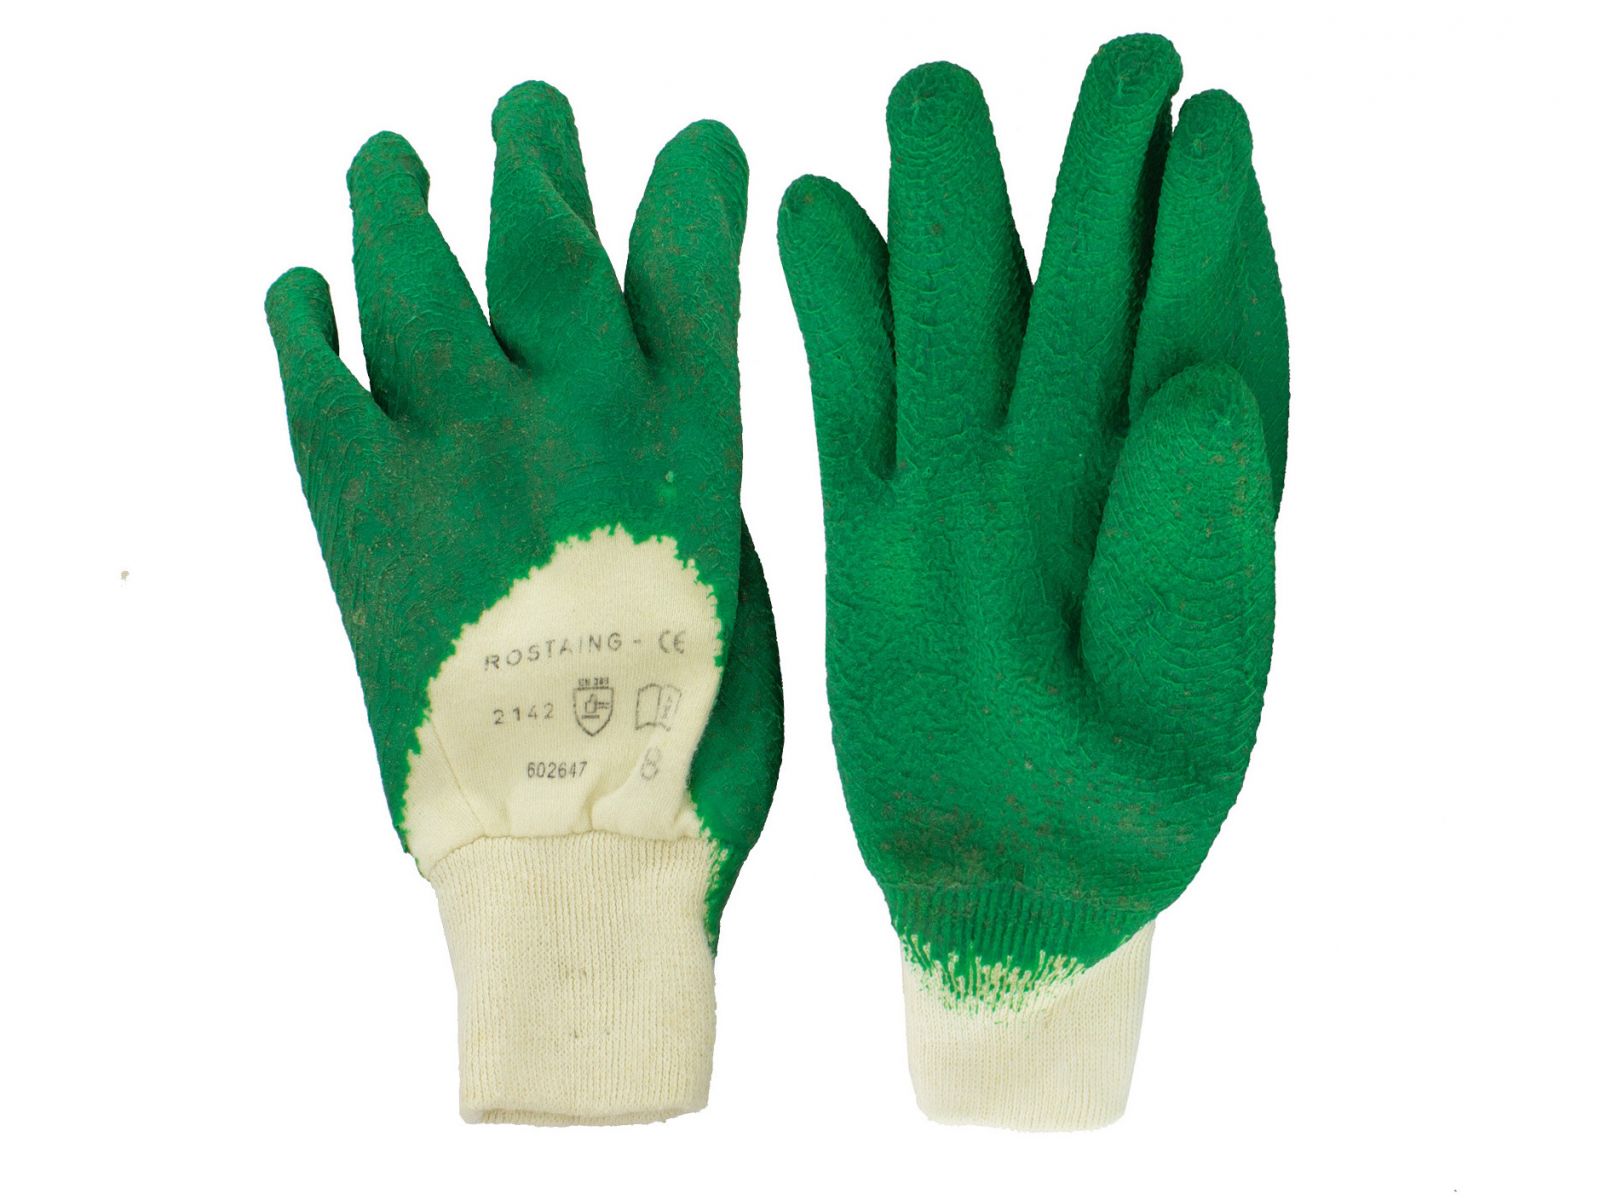 100% cotton Cloth Gloves with a rubberized wrist strap (Rostain)